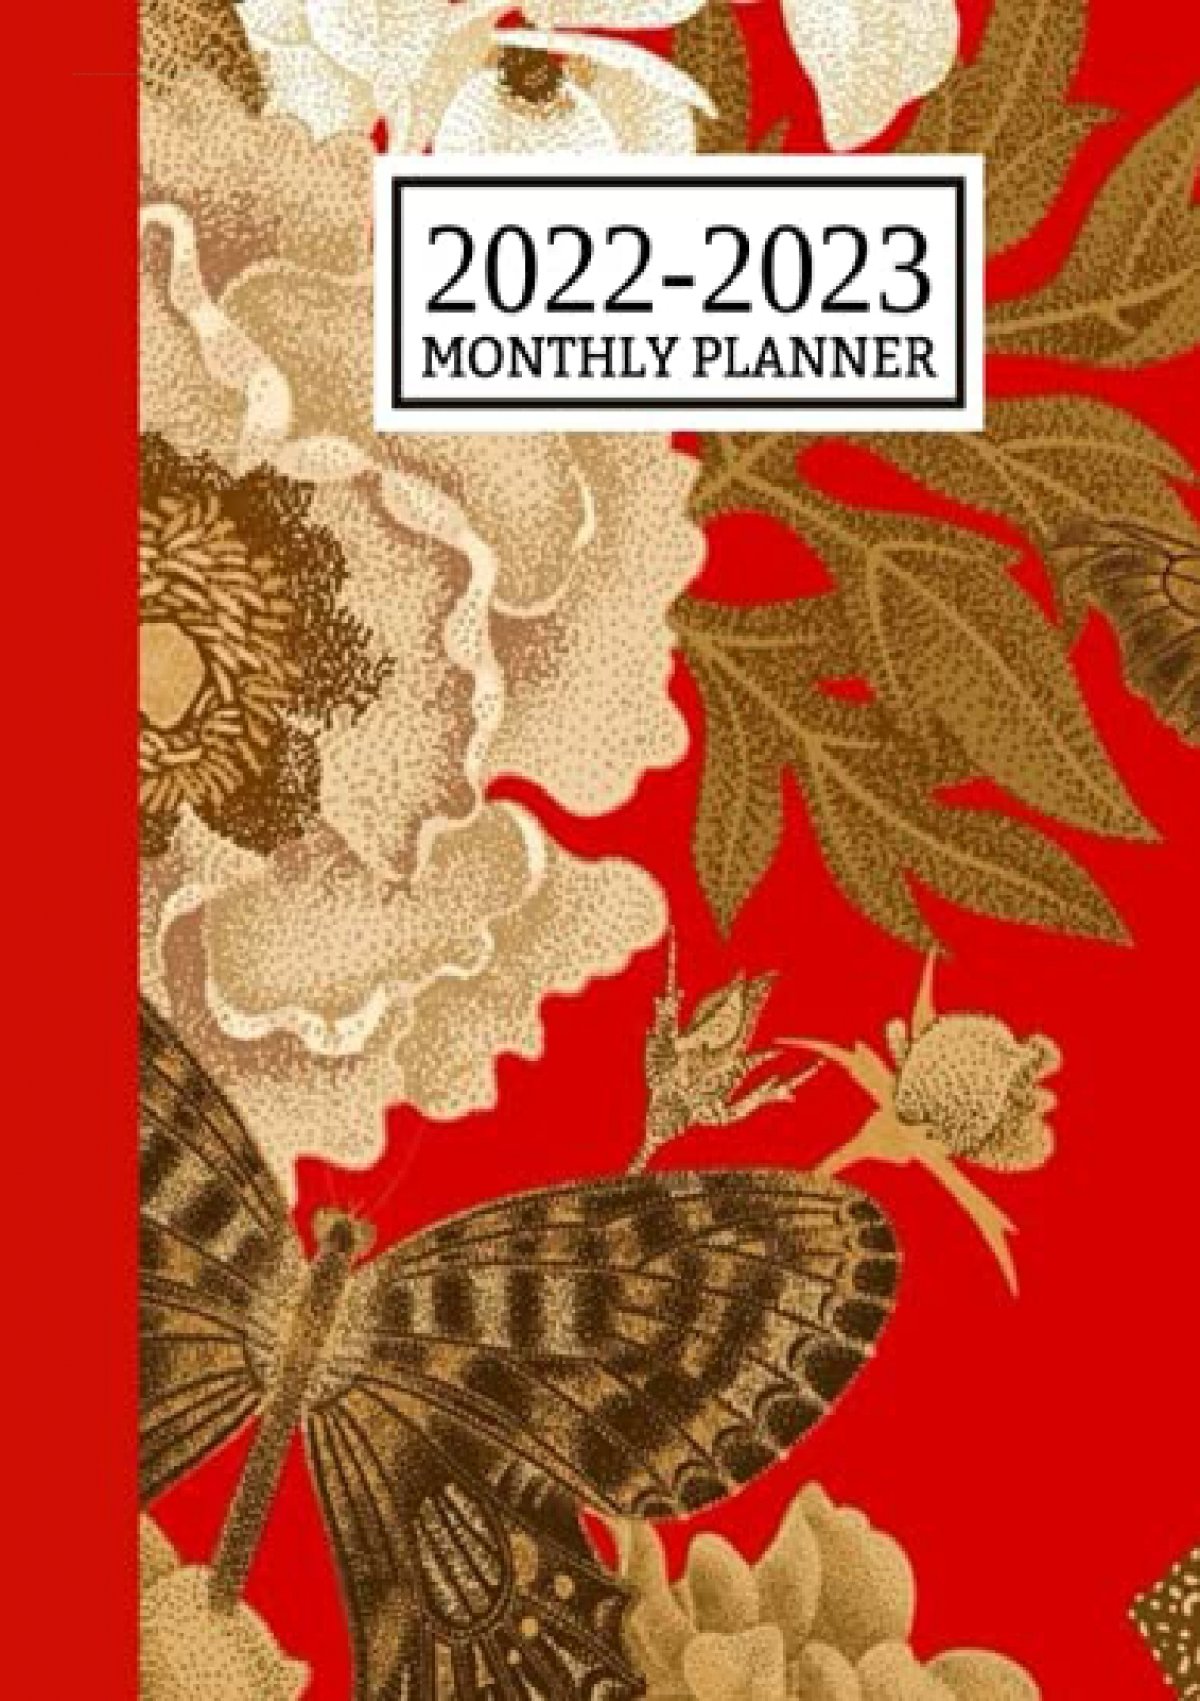 Pdf Read 2022 2023 Monthly Planner 2022 2023 Monthly Planner Large 